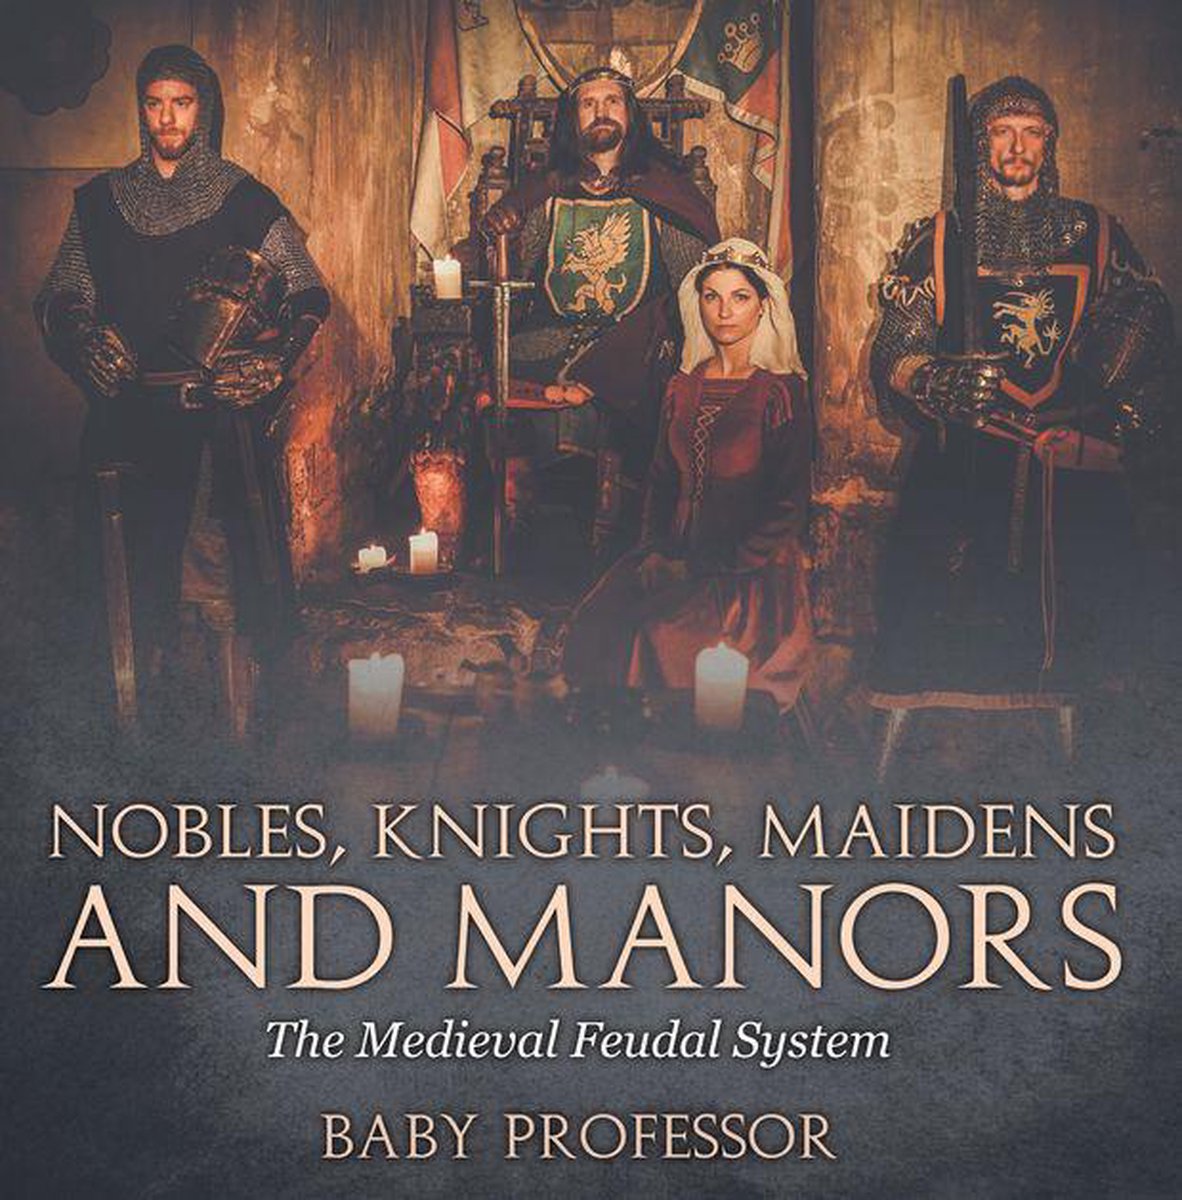 Nobles, Knights, Maidens and Manors: The Medieval Feudal System - Baby Professor